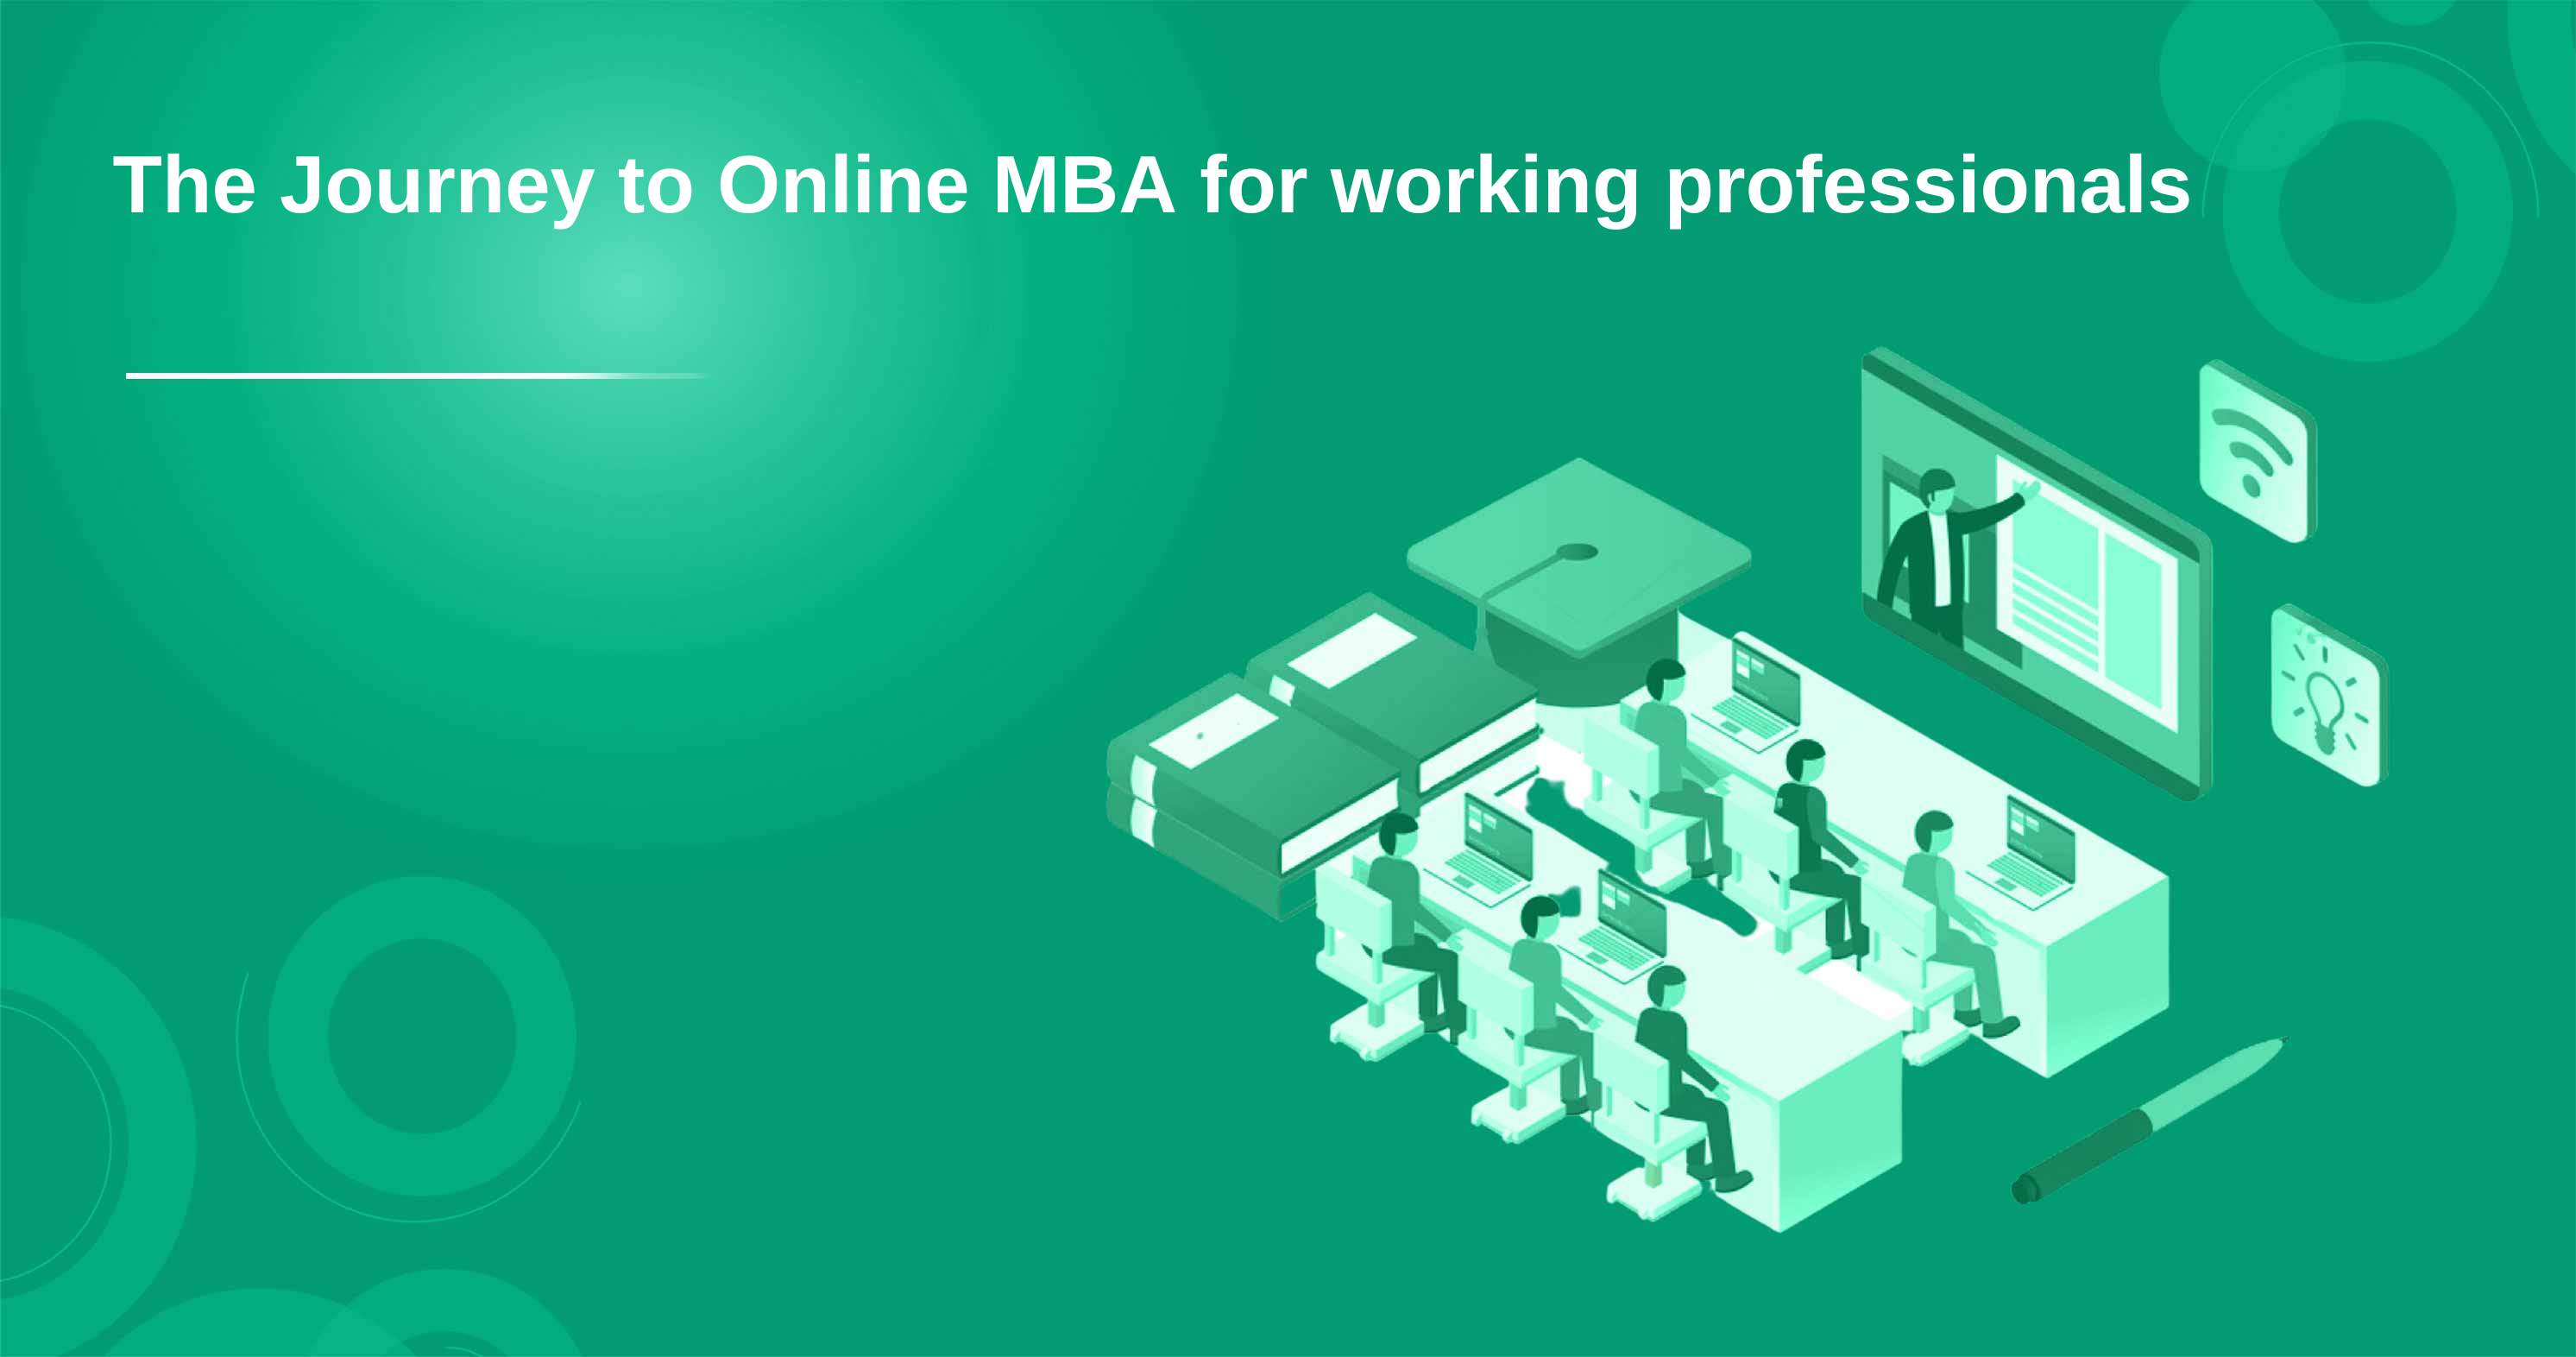 The Journey to Online MBA for working professionals